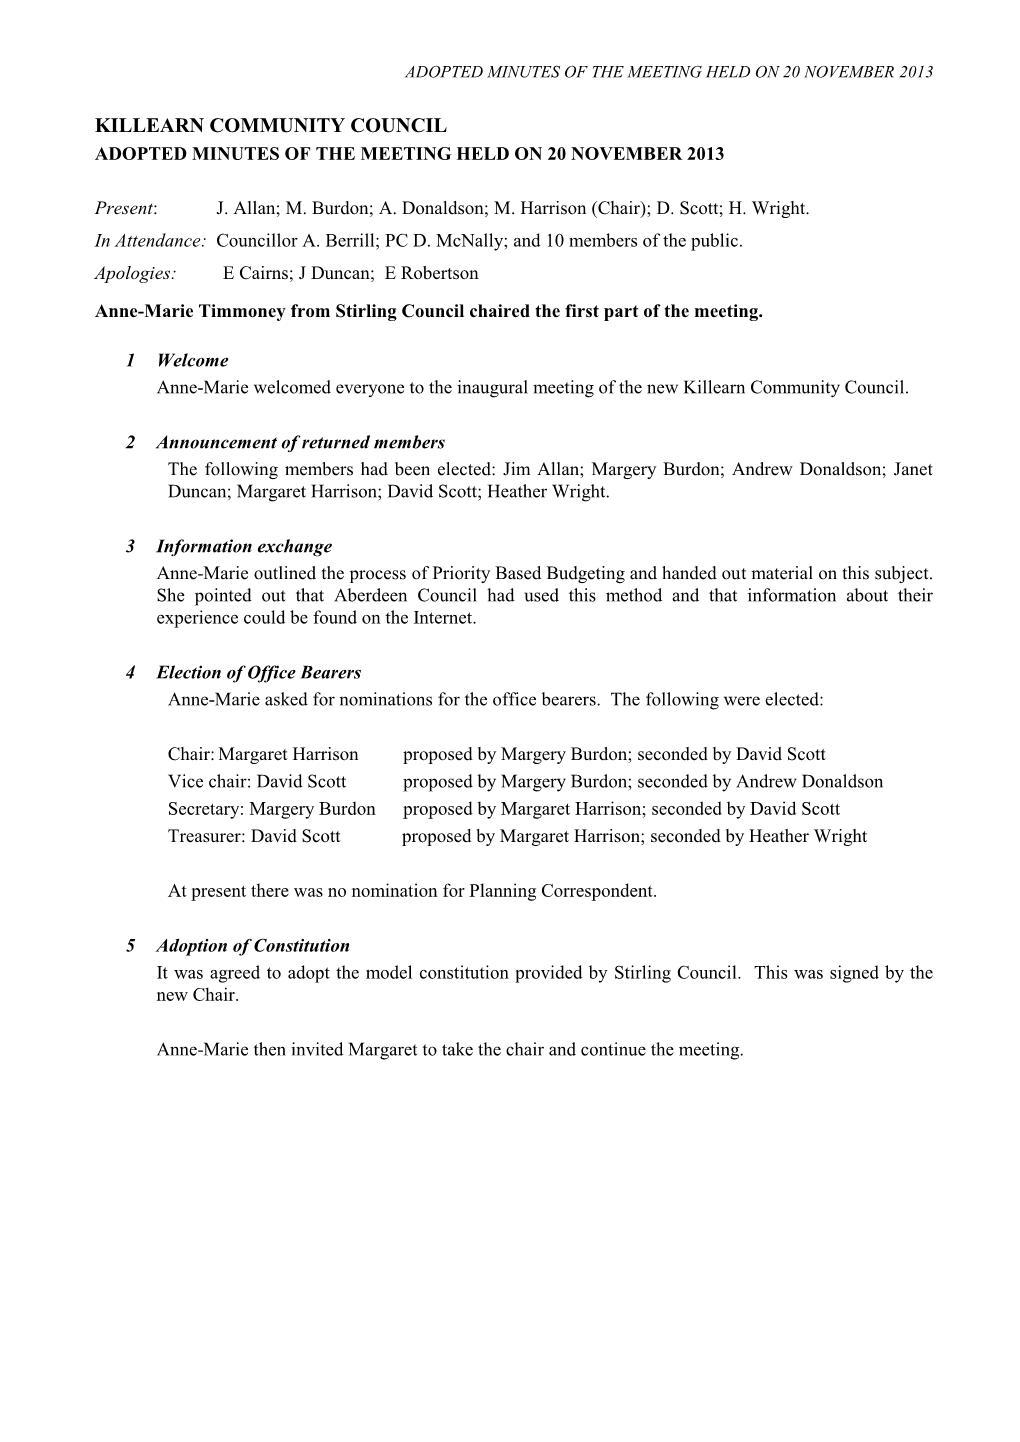 Killearn Community Council Adopted Minutes of the Meeting Held on 20 November 2013